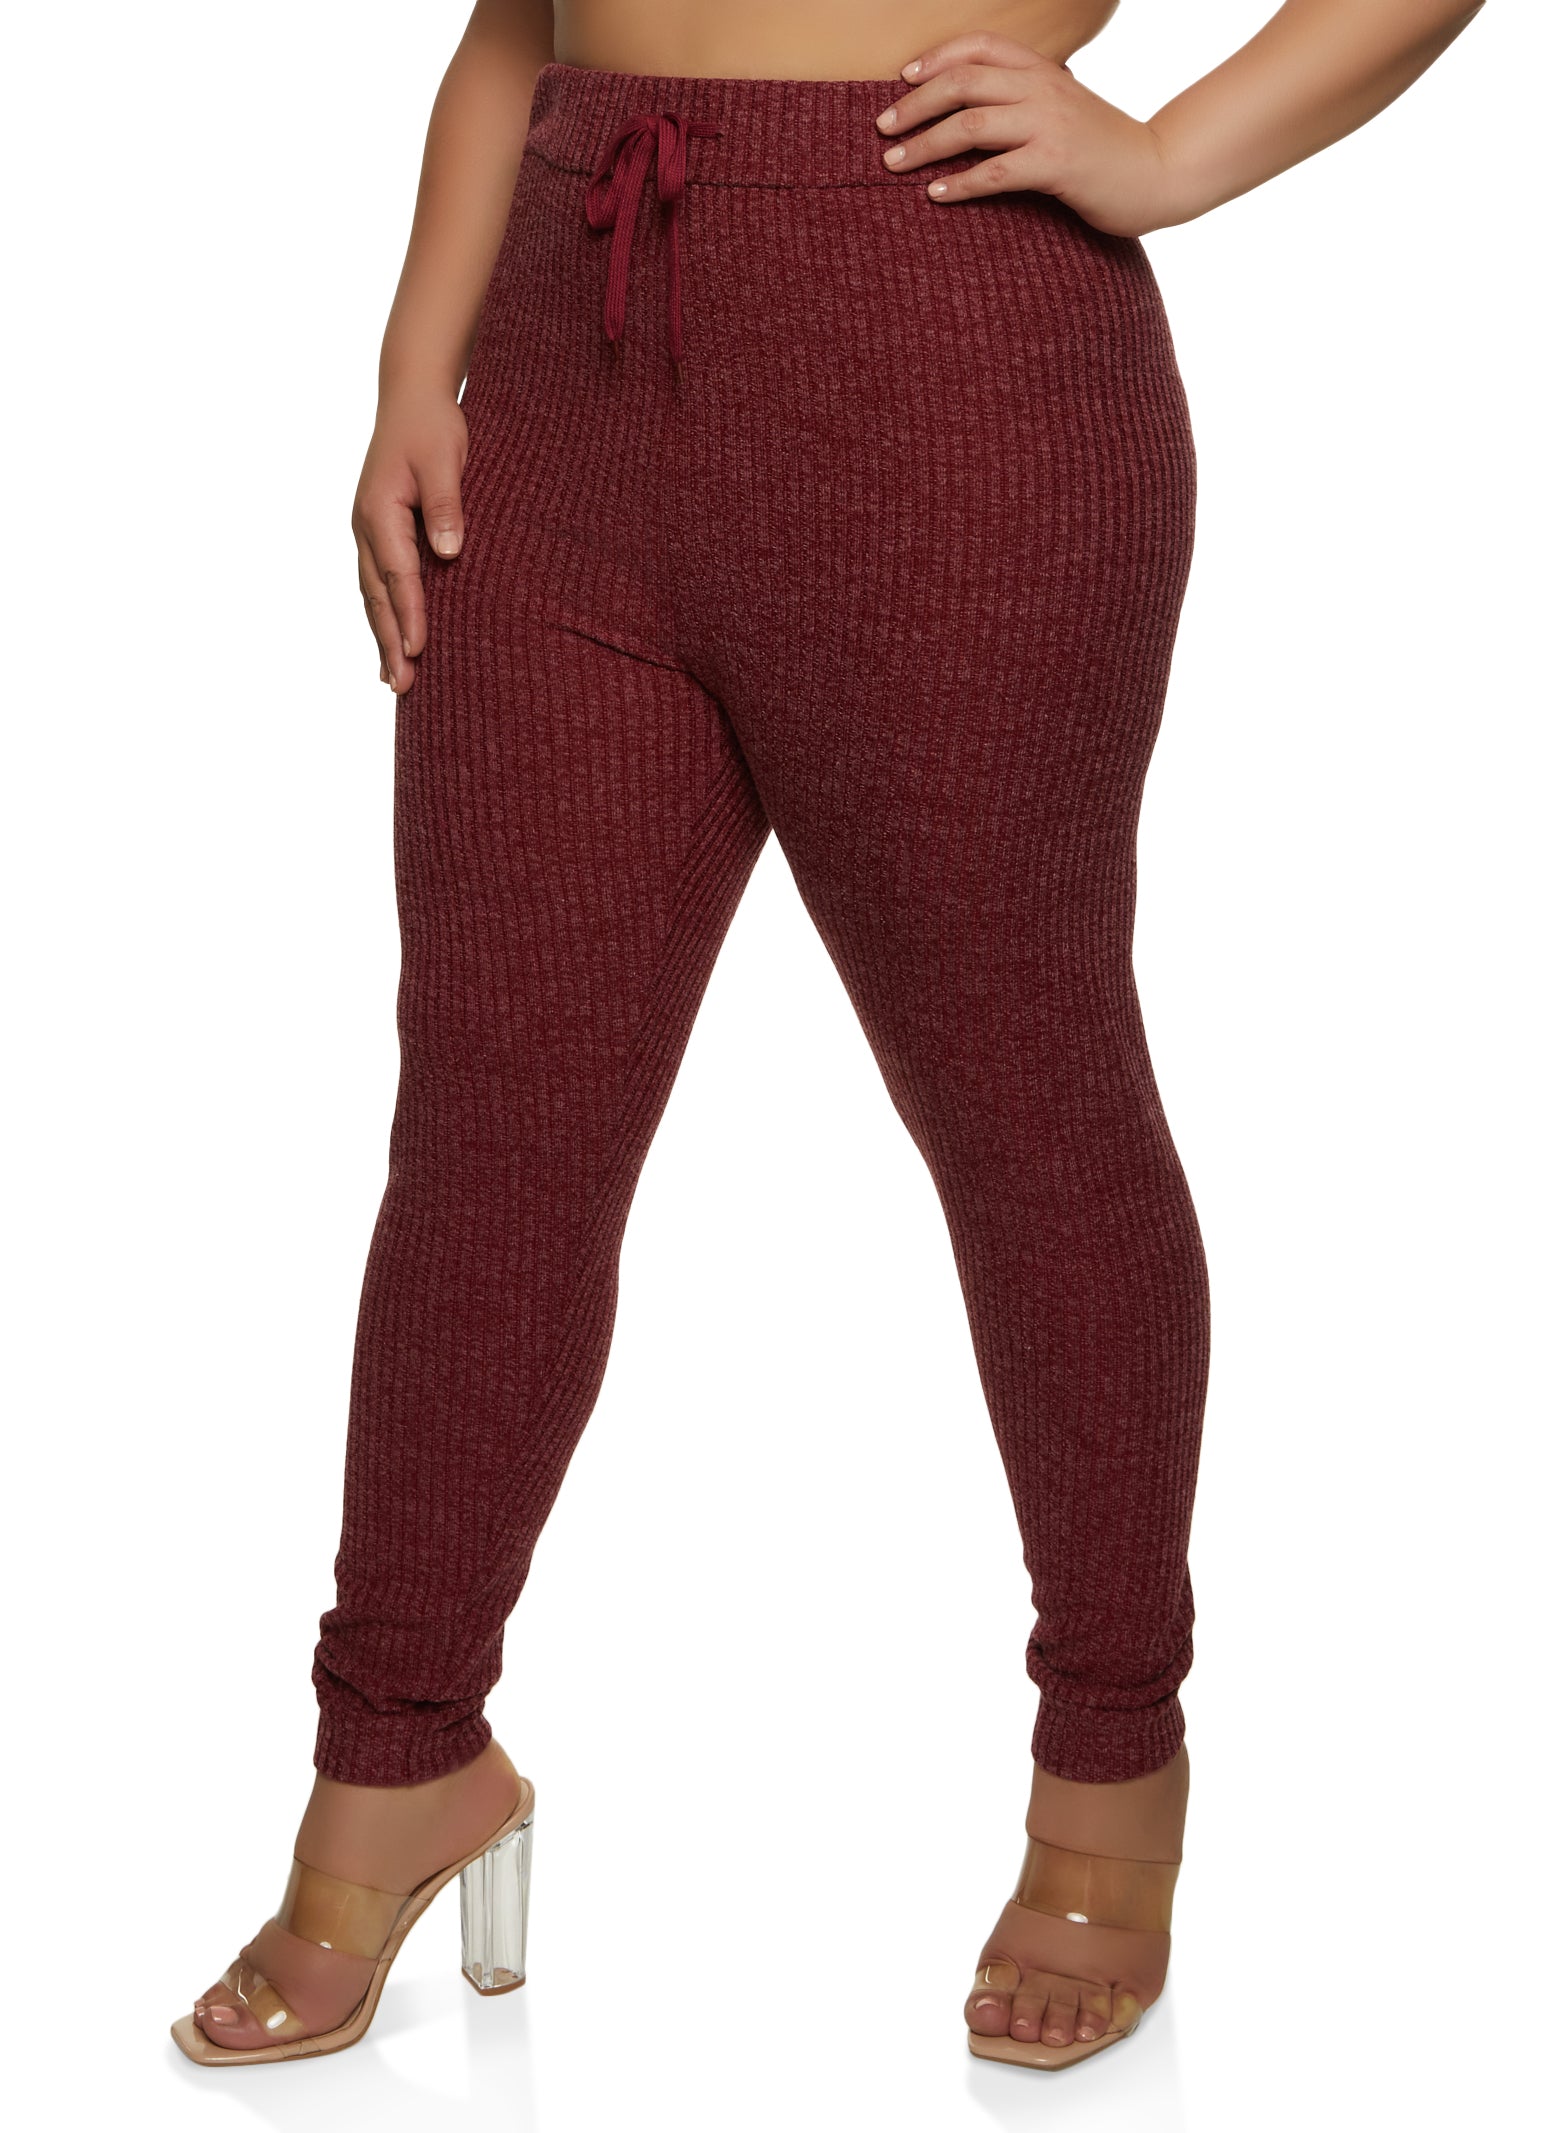 Extra High-Waisted PowerSoft Rib-Knit Super Flare Leggings for Women